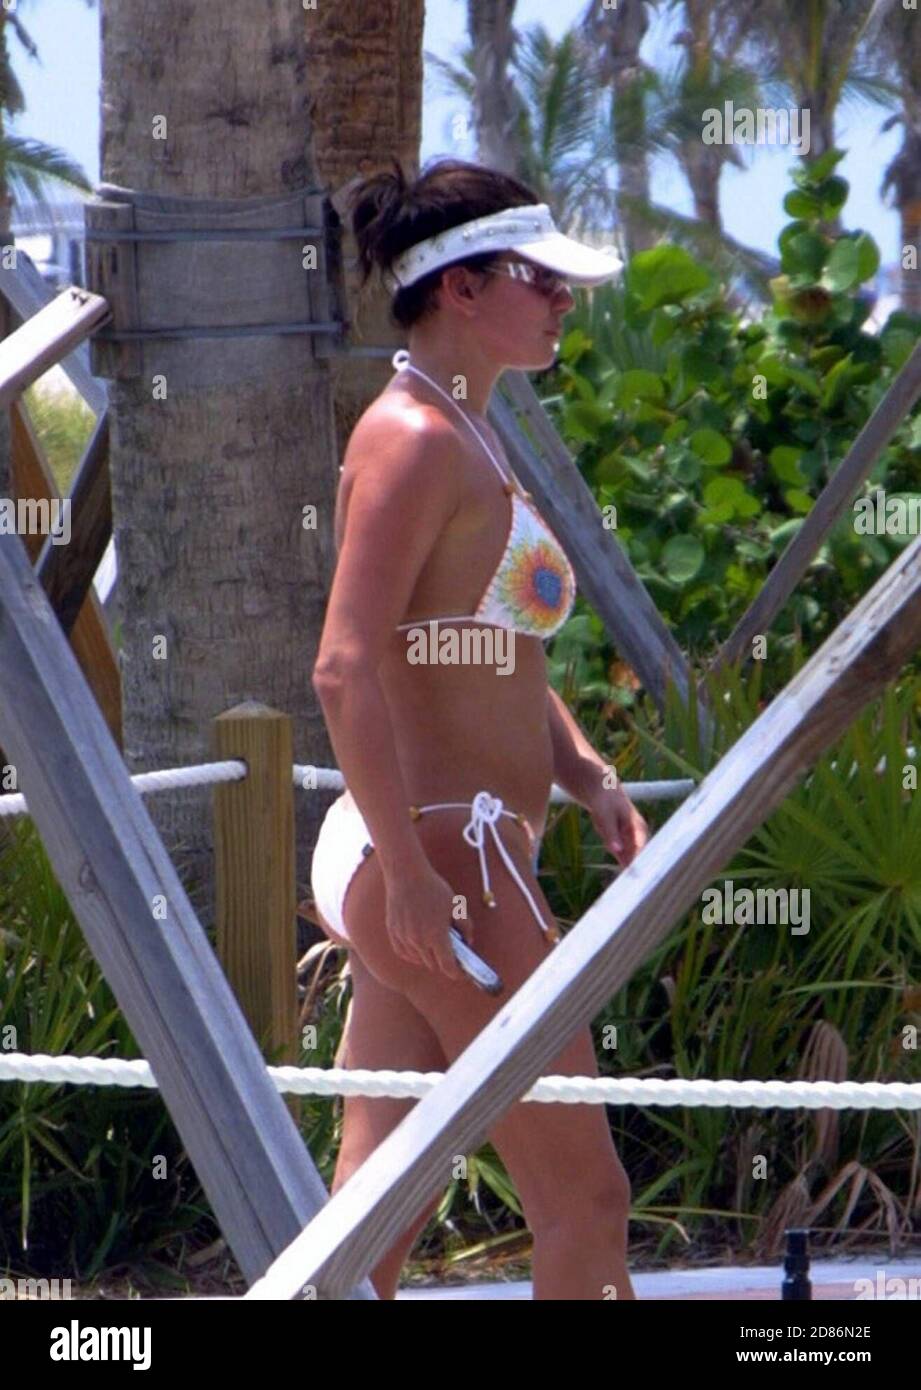 Exclusive!! Laura Pausini having a chat on her phone whilst relaxing at a  Miami Beach hotel before her Miami concert, 4/12/05 [[mab]] Stock Photo -  Alamy